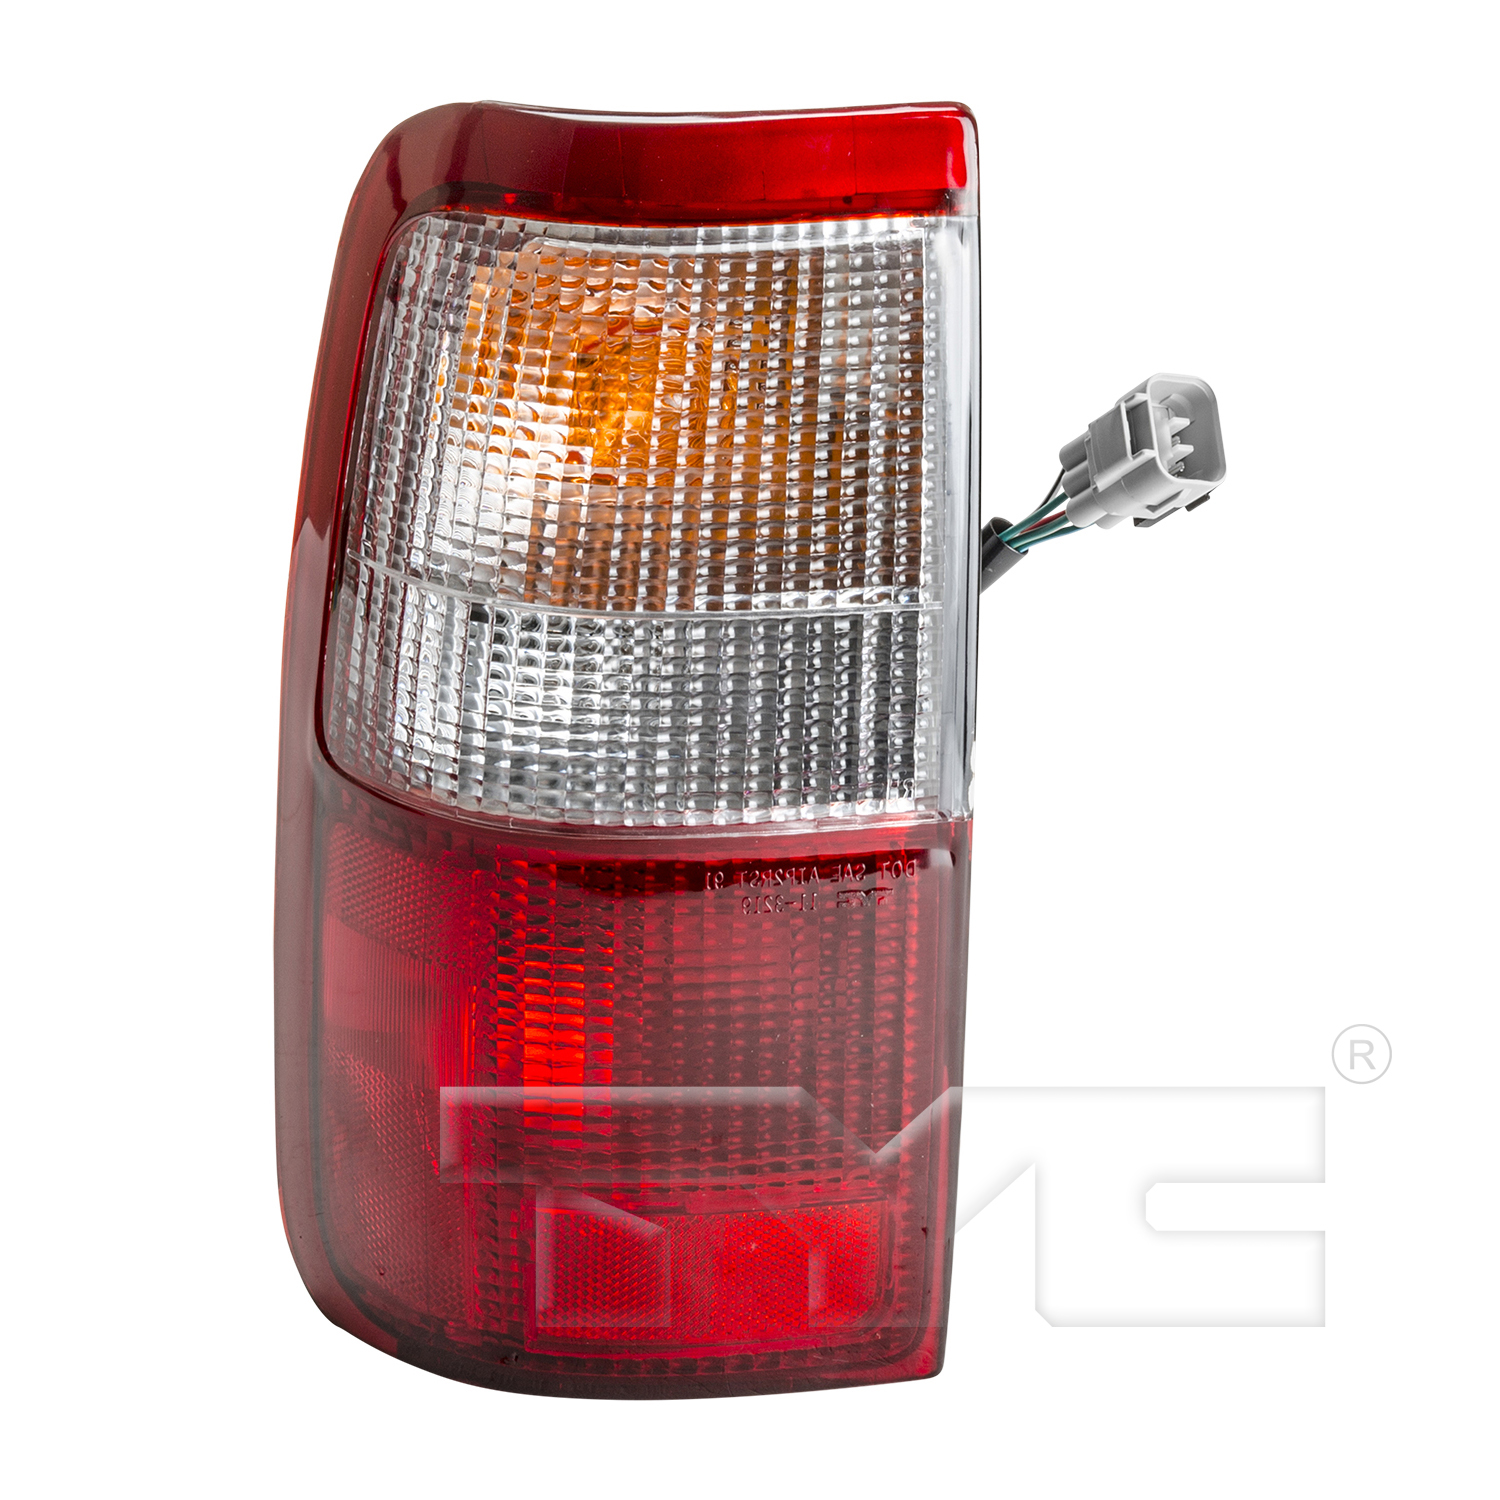 Aftermarket TAILLIGHTS for TOYOTA - T100, T100,93-98,LT Taillamp assy